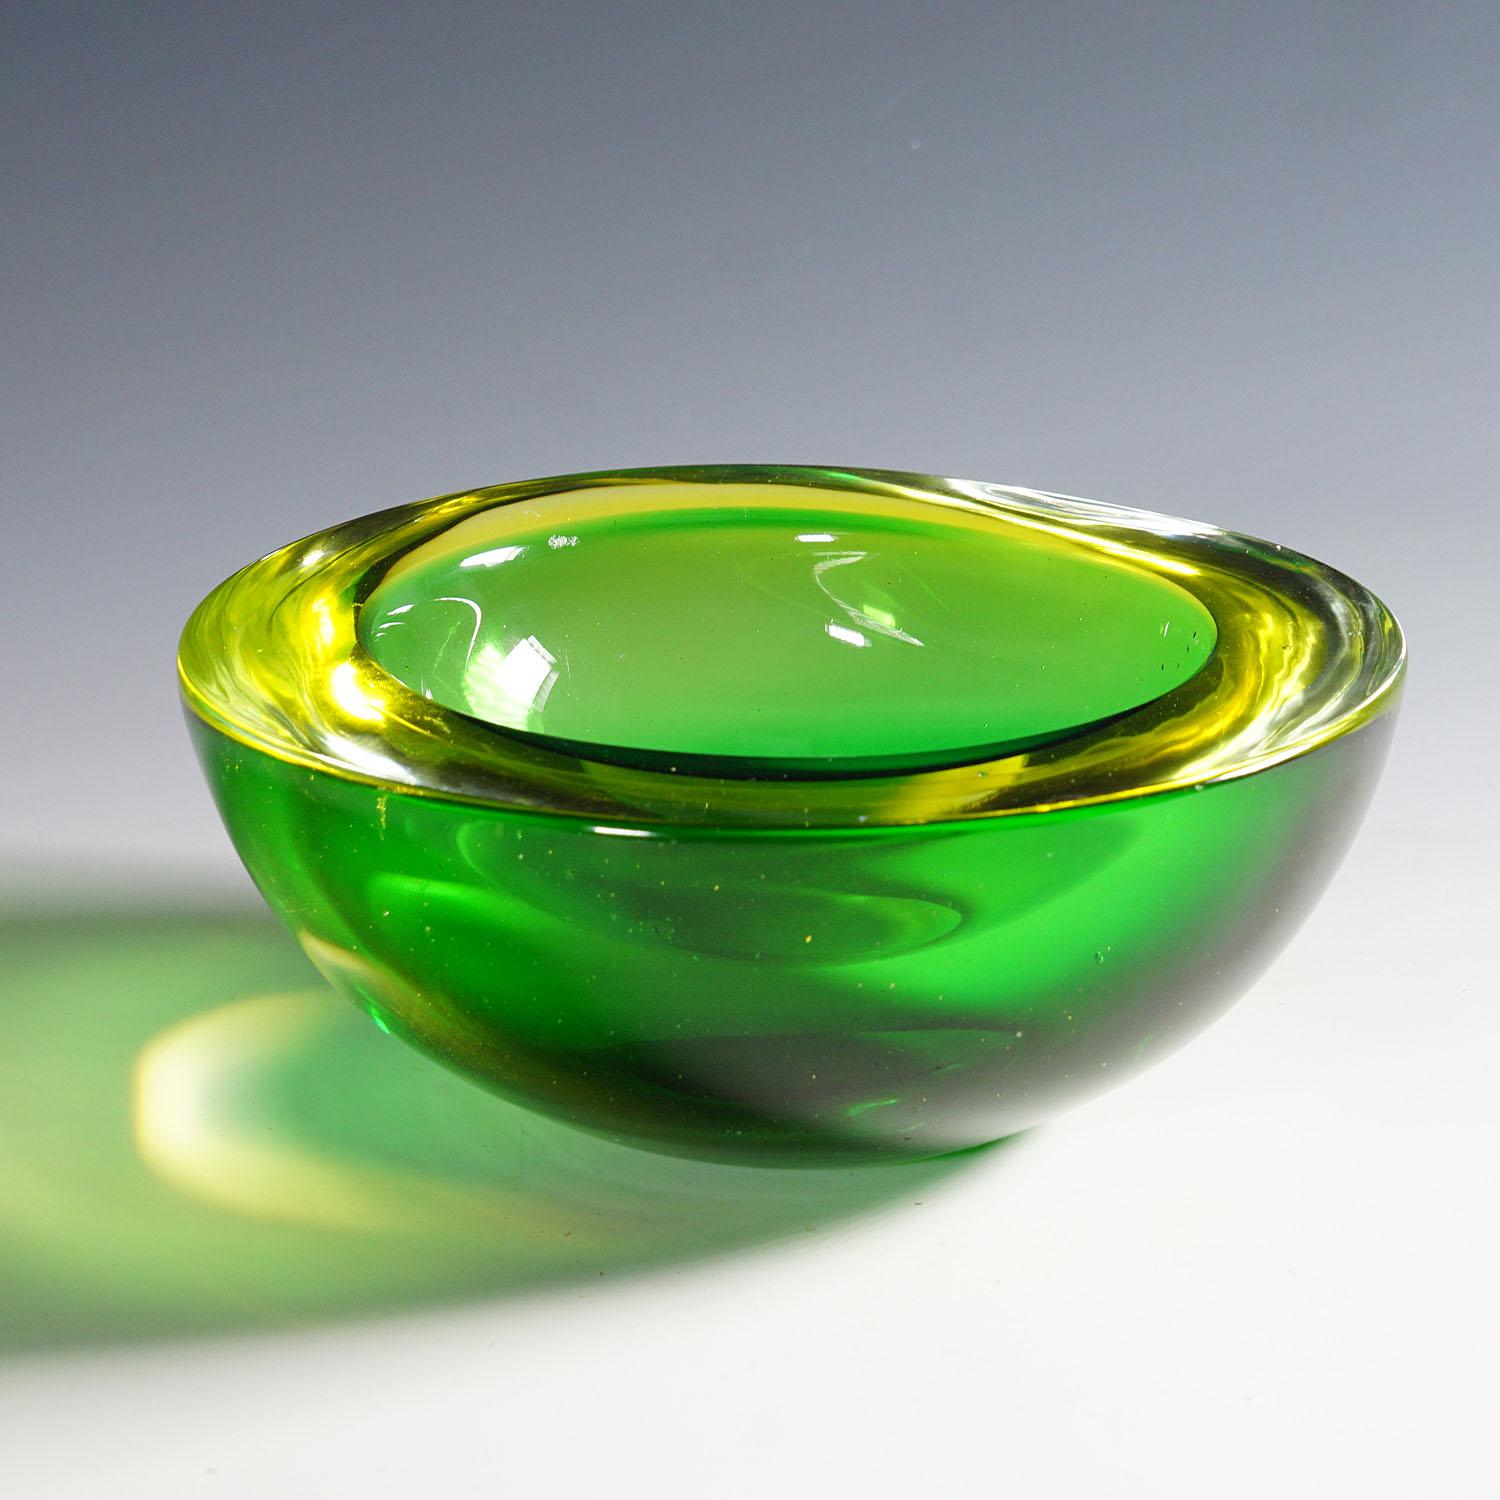 Mid-Century Modern Archimede Seguso Geode Bowl in Green and Yellow, Murano Italy Ca. 1960s For Sale